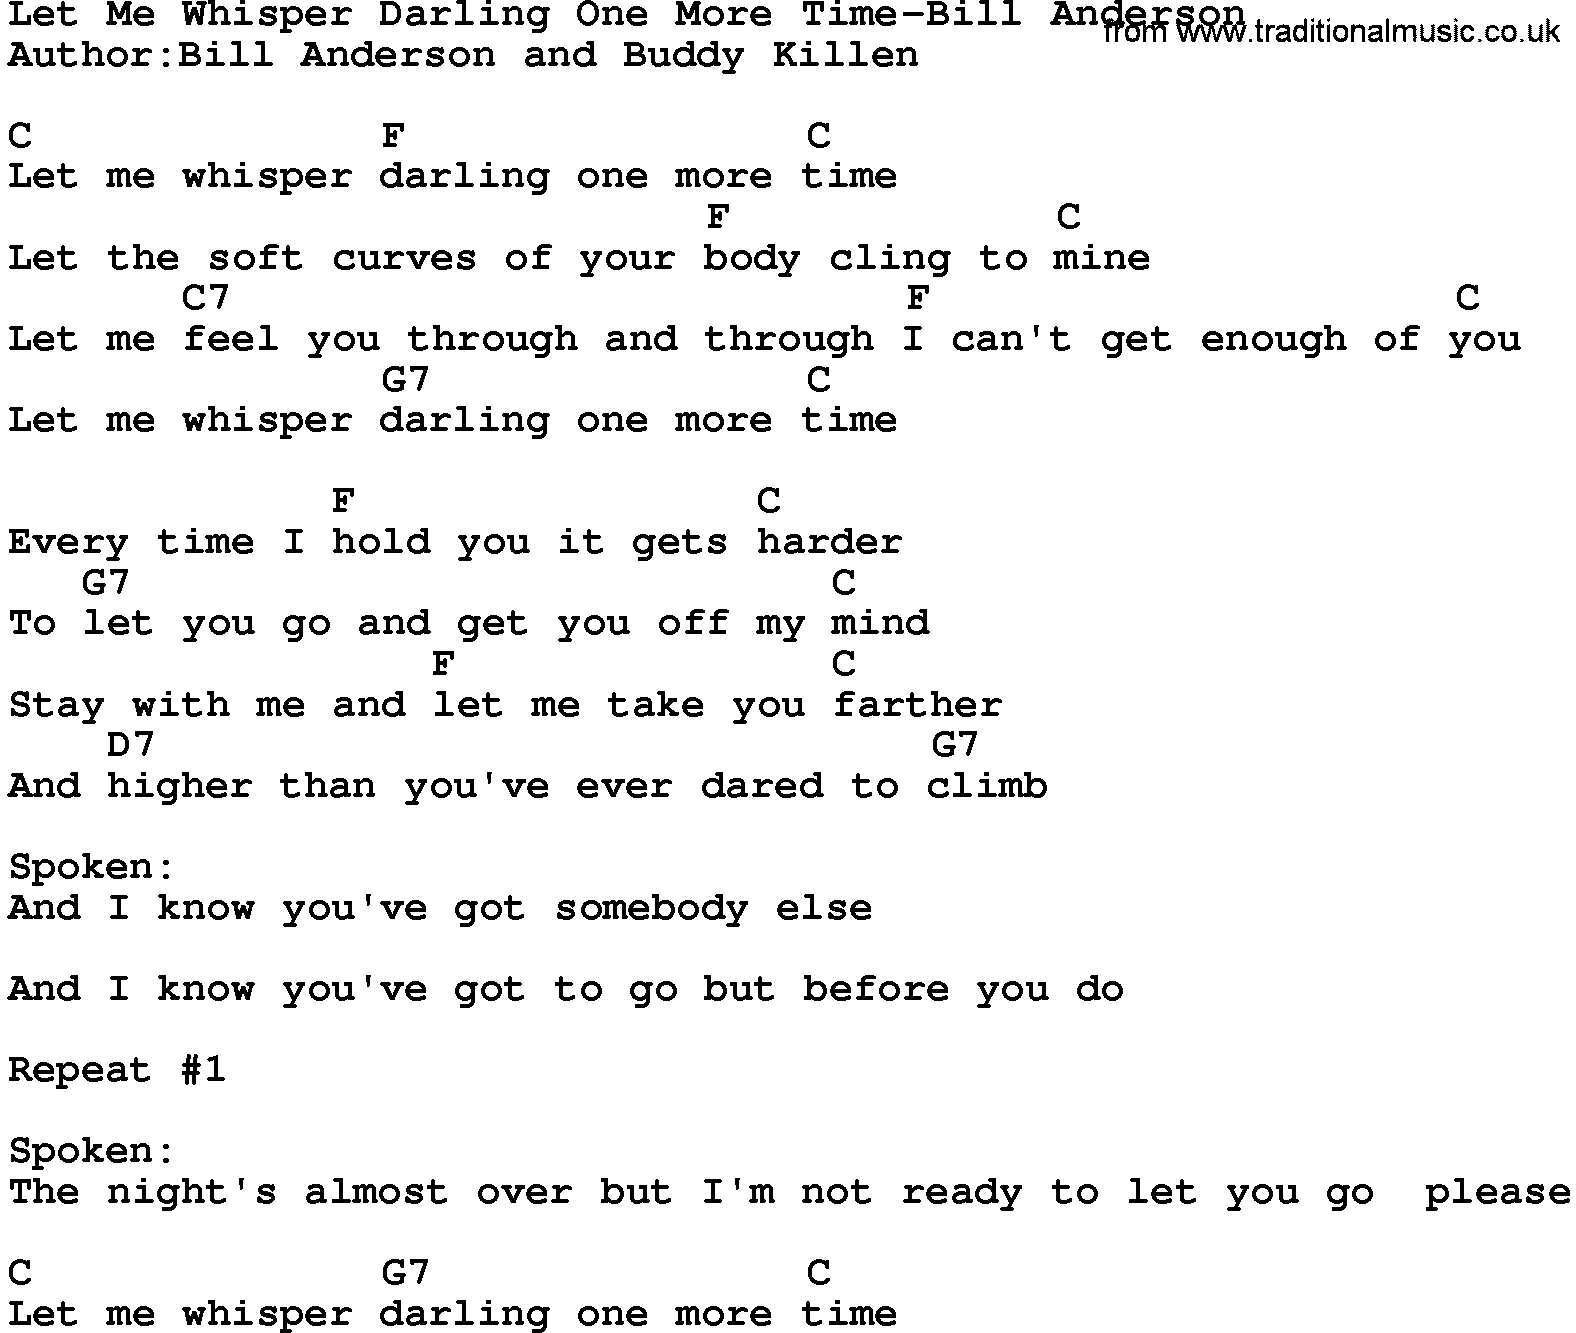 Country music song: Let Me Whisper Darling One More Time-Bill Anderson lyrics and chords